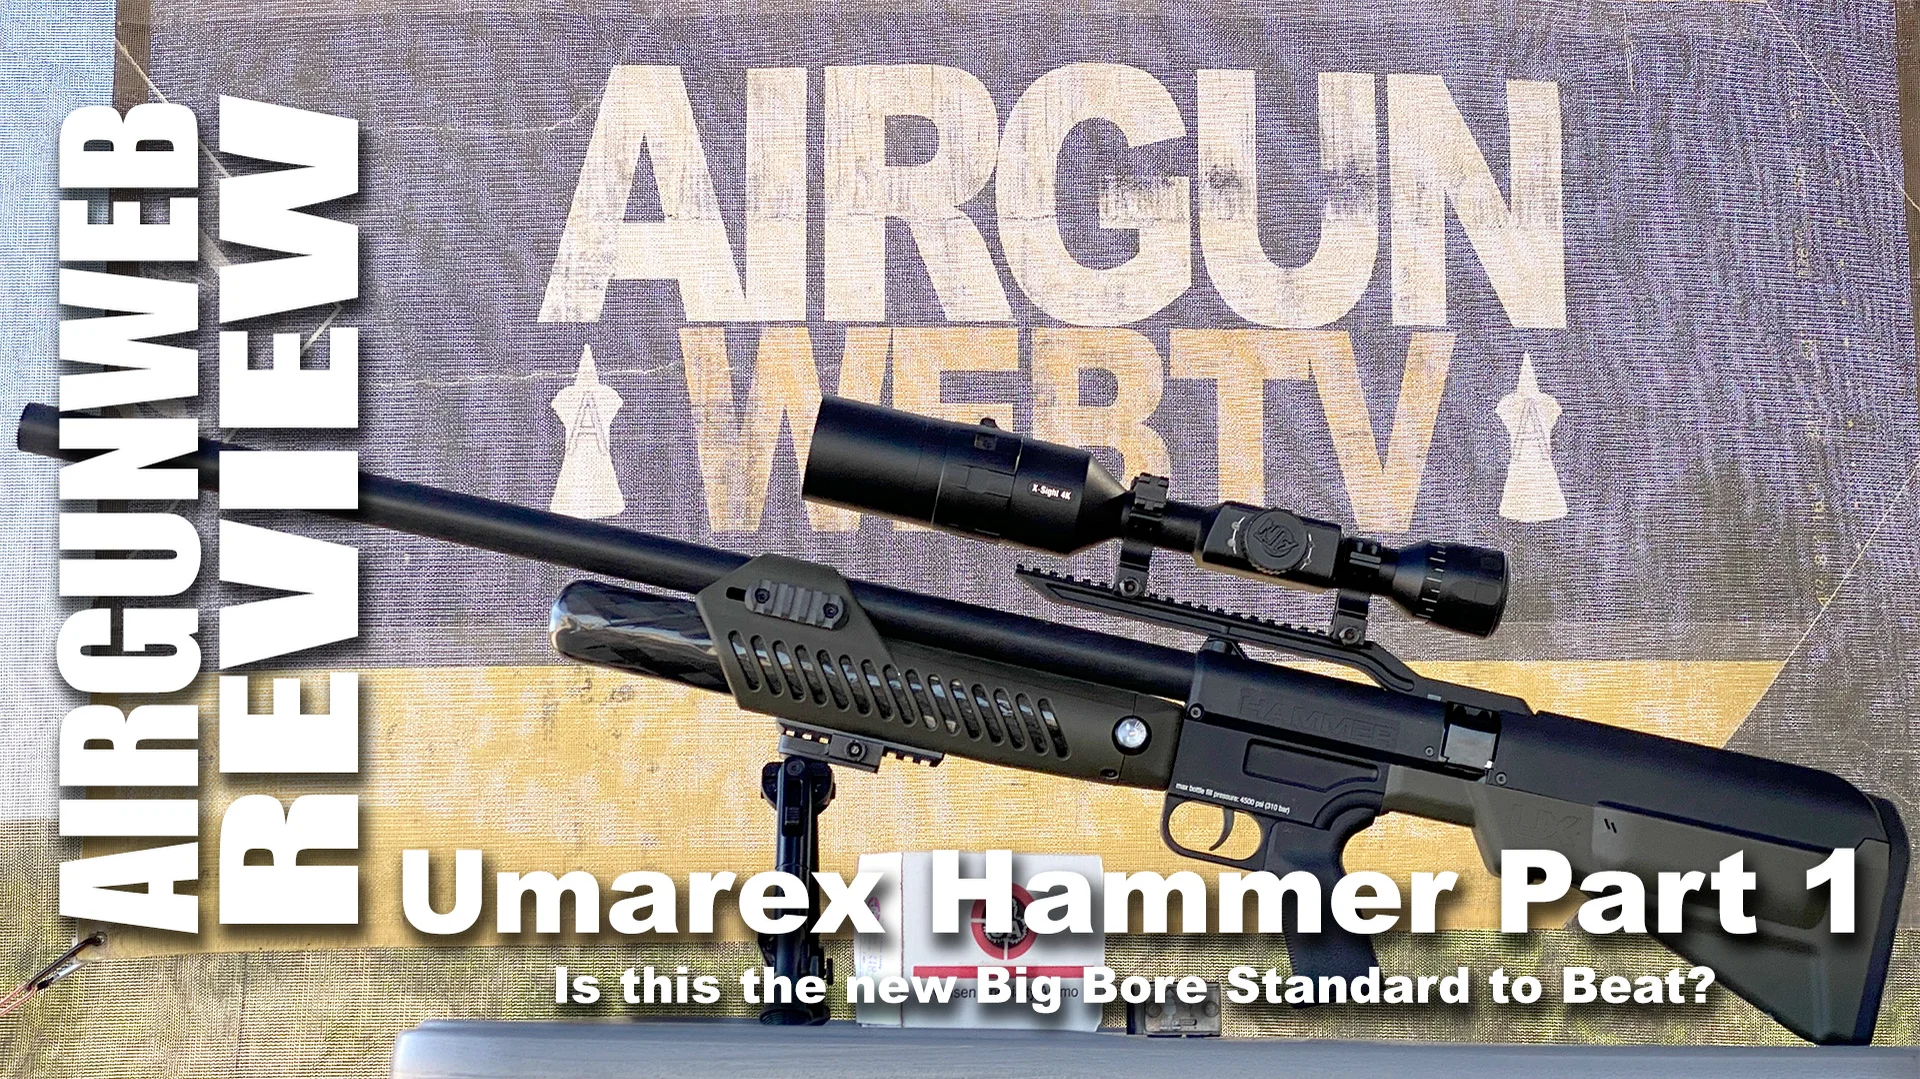 Umarex T4E TR50 .50 Caliber Paintball Revolver Table Top Review on Vimeo